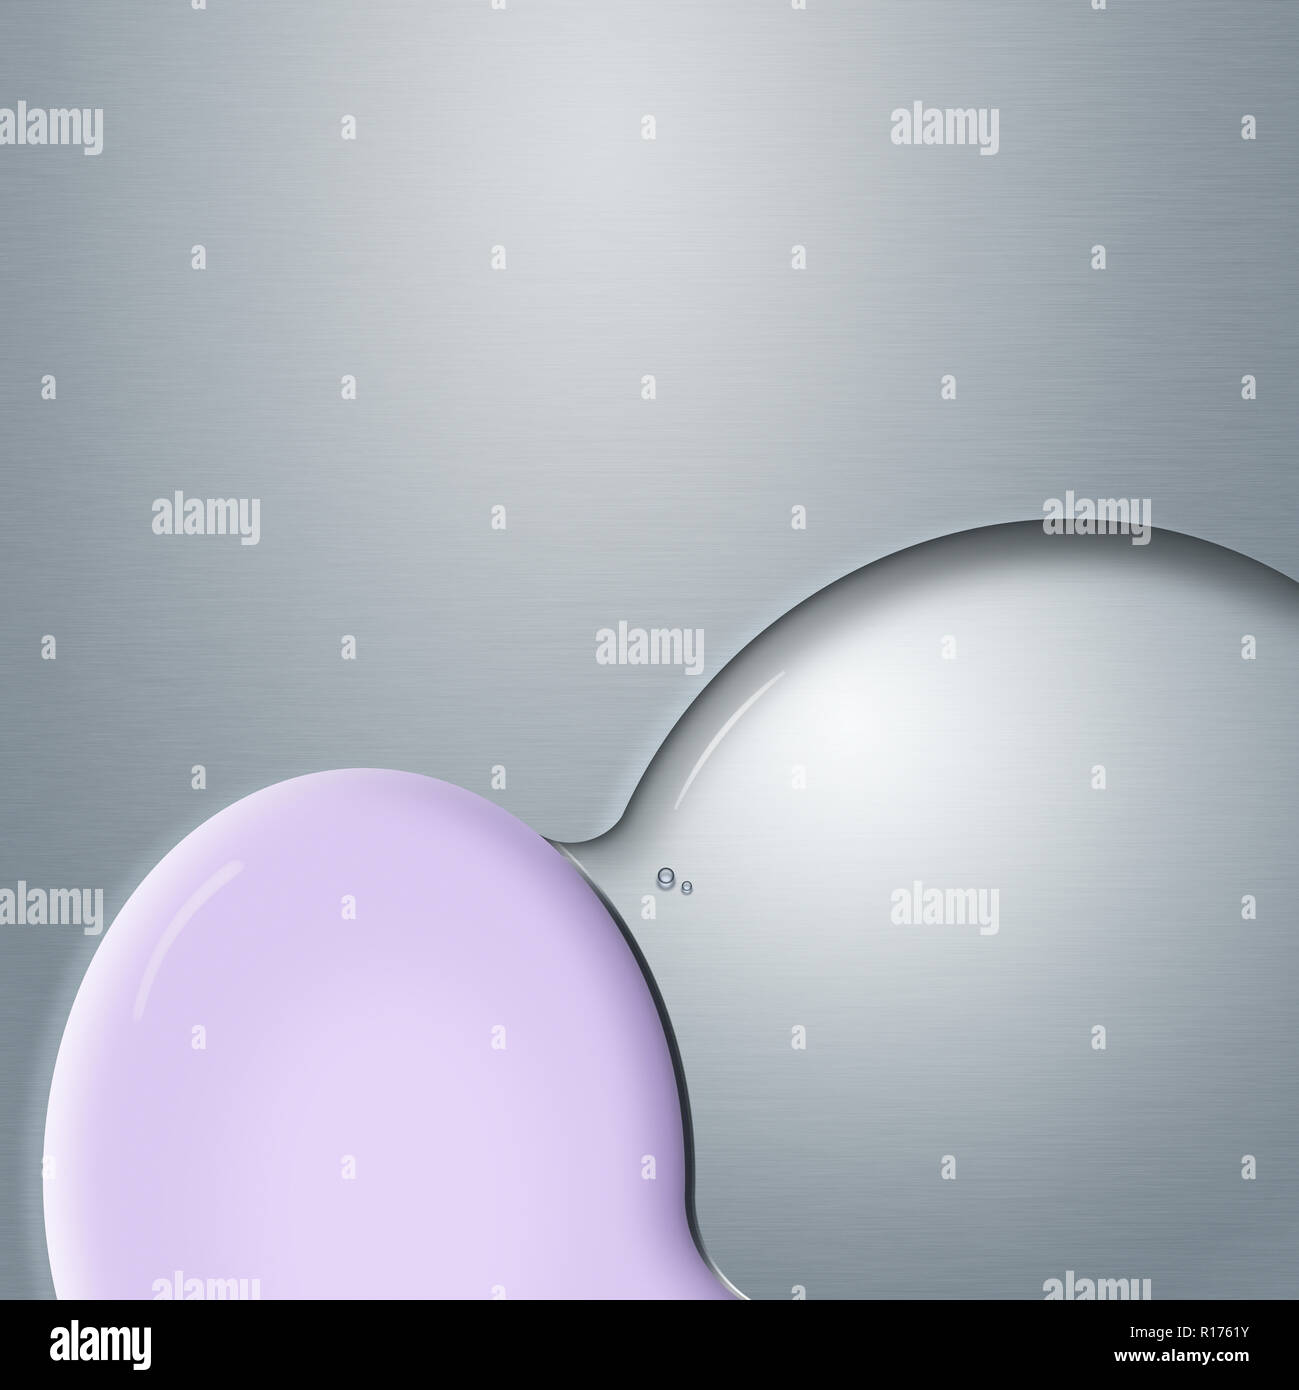 Opaque and translucent body lotion merging together, grey background Stock Photo